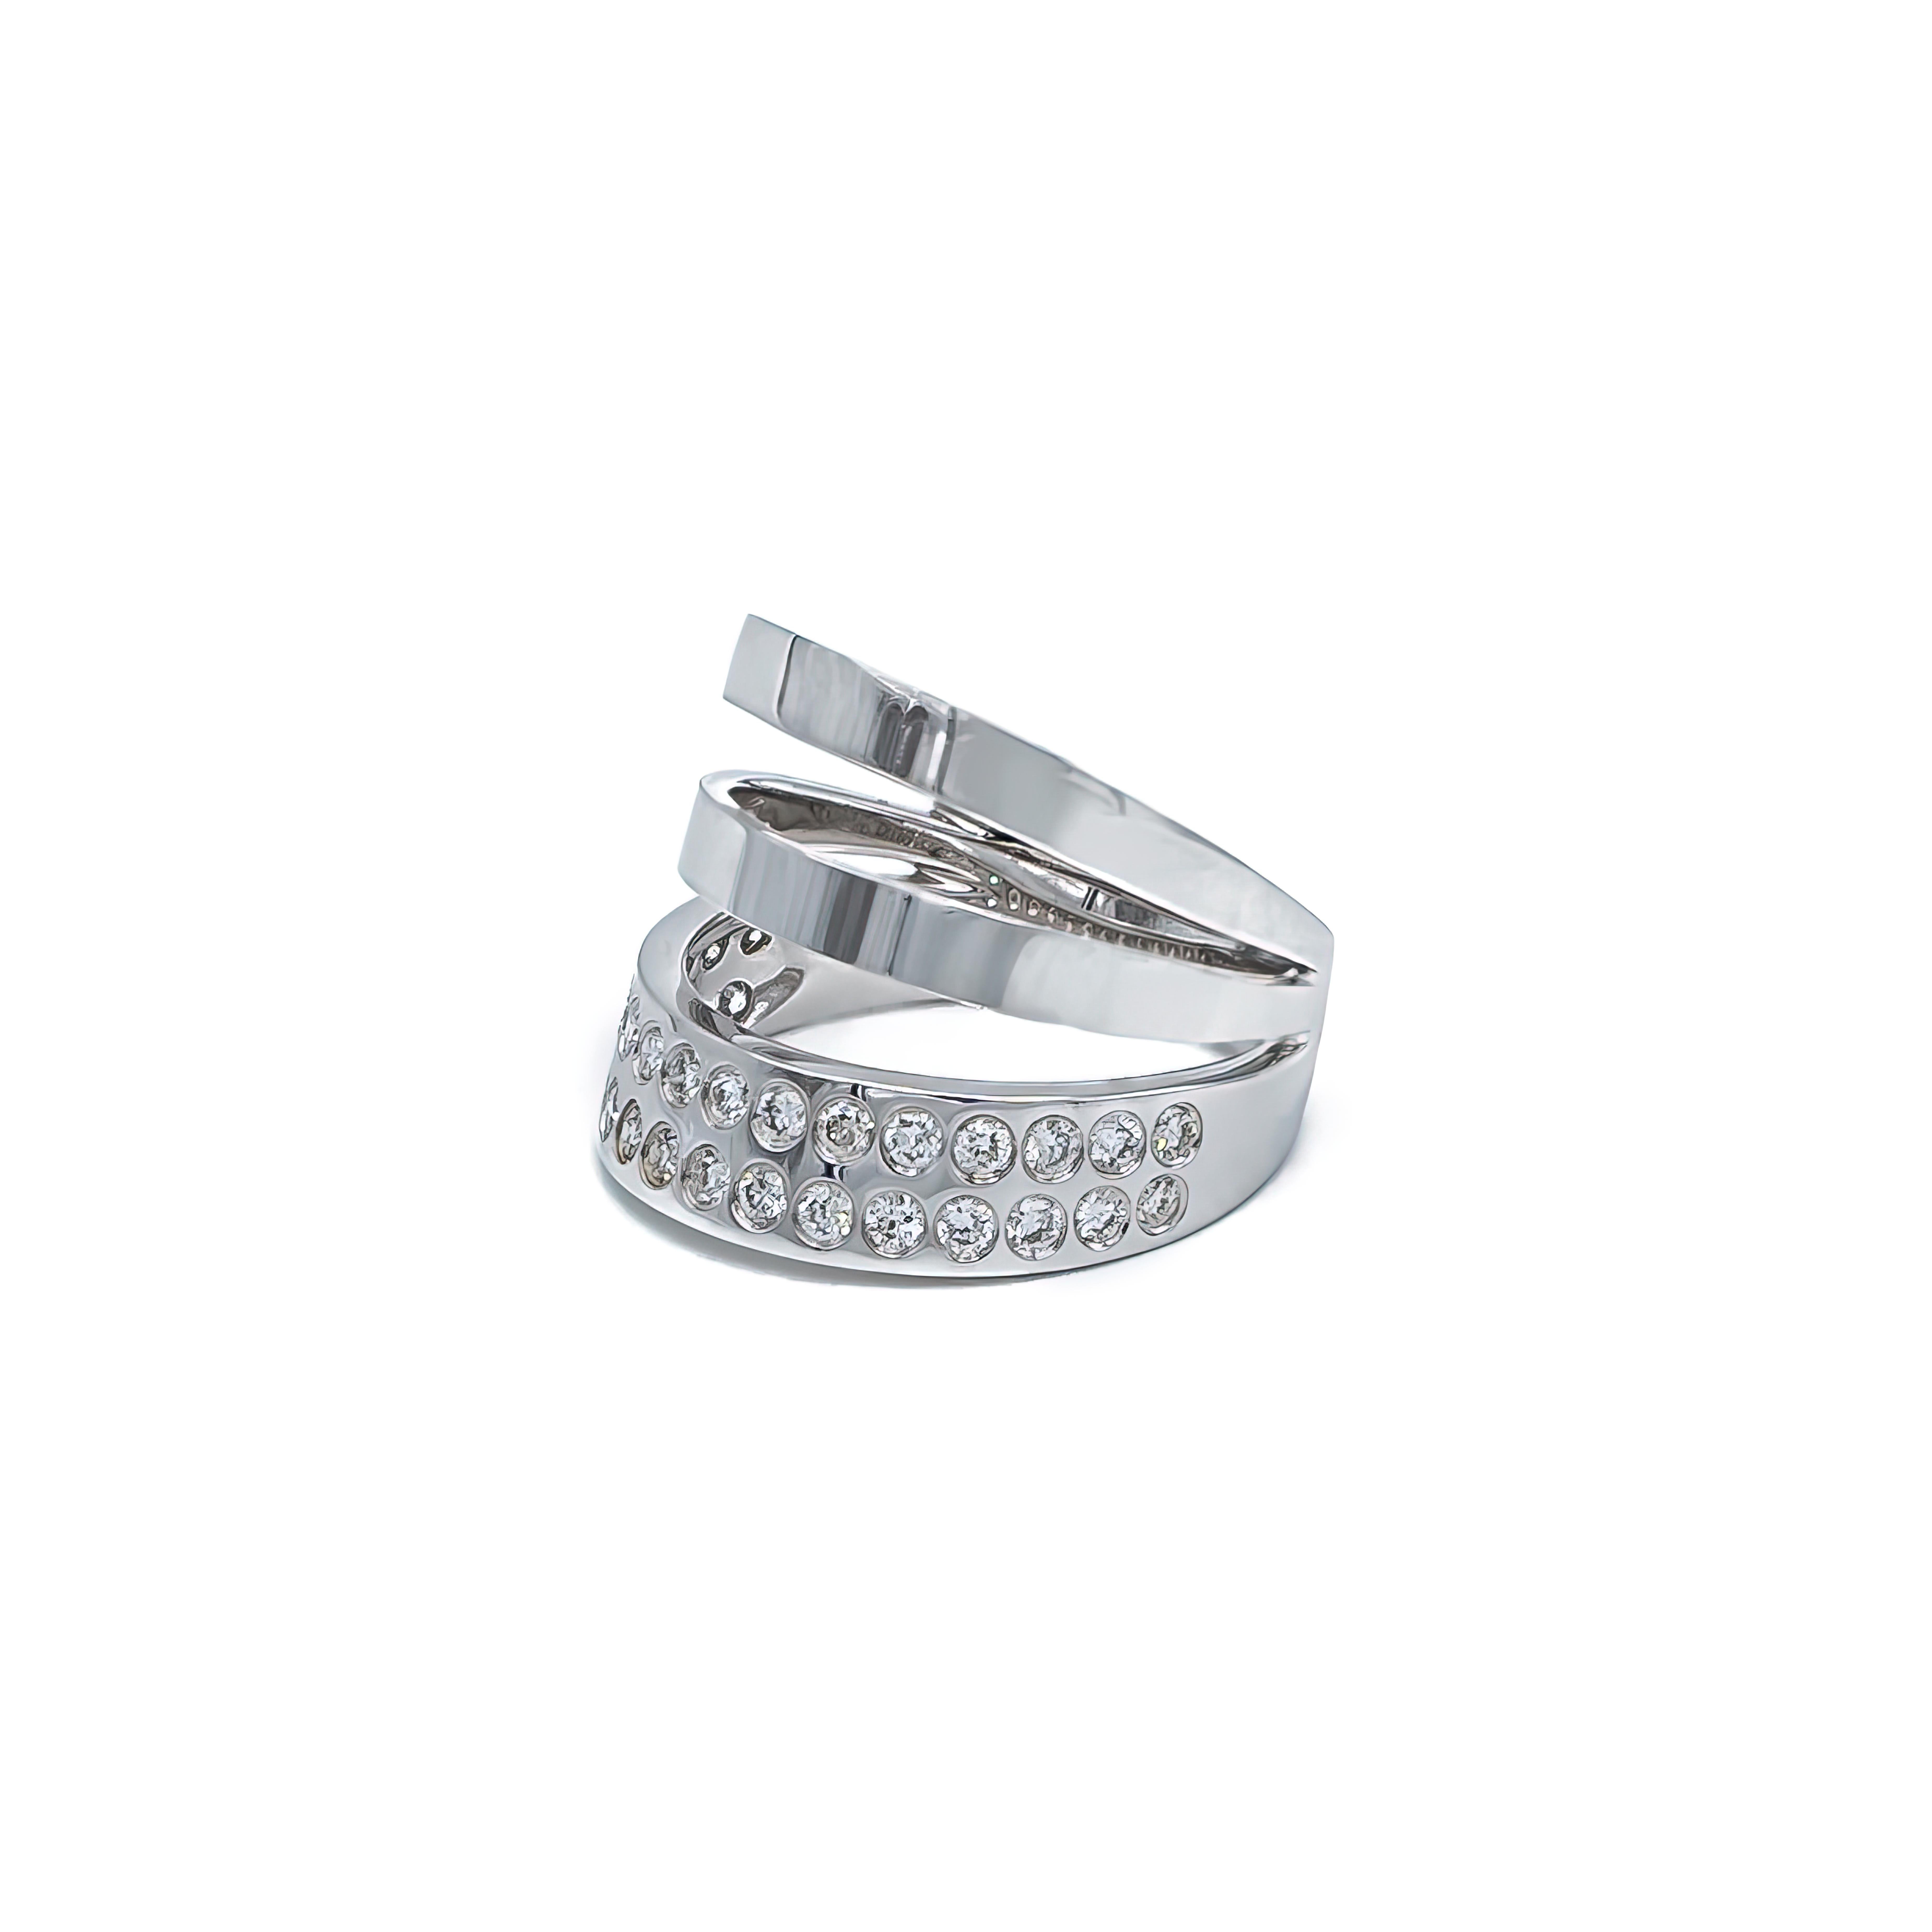 Total Ring Carat Weight: 1.38cts
Diamond Clarity: VS1
Diamond Color: G
Gold Purity: 18k
Gold Color: White
Gold Weight: 7.22g
Diamond Type: Natural Diamond, Conflict-Free

18k Solid Gold and Diamonds Layered Triple Stacked Midi Ring
This piece has